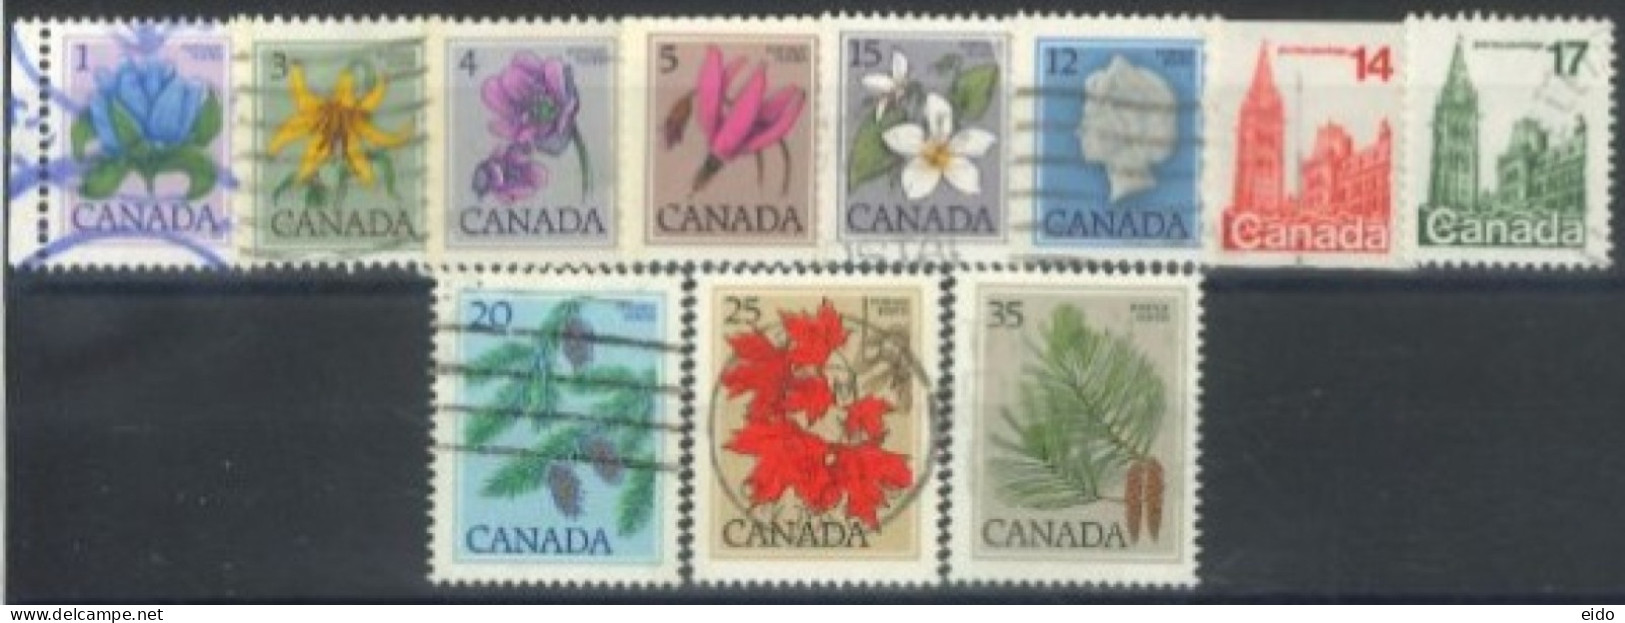 CANADA - 1977, QUEEN ELIZABETH II, HOUSE OF PARLIAMENT, FLOWERS & LEAVES STAMPS SET OF 11, USED. - Used Stamps